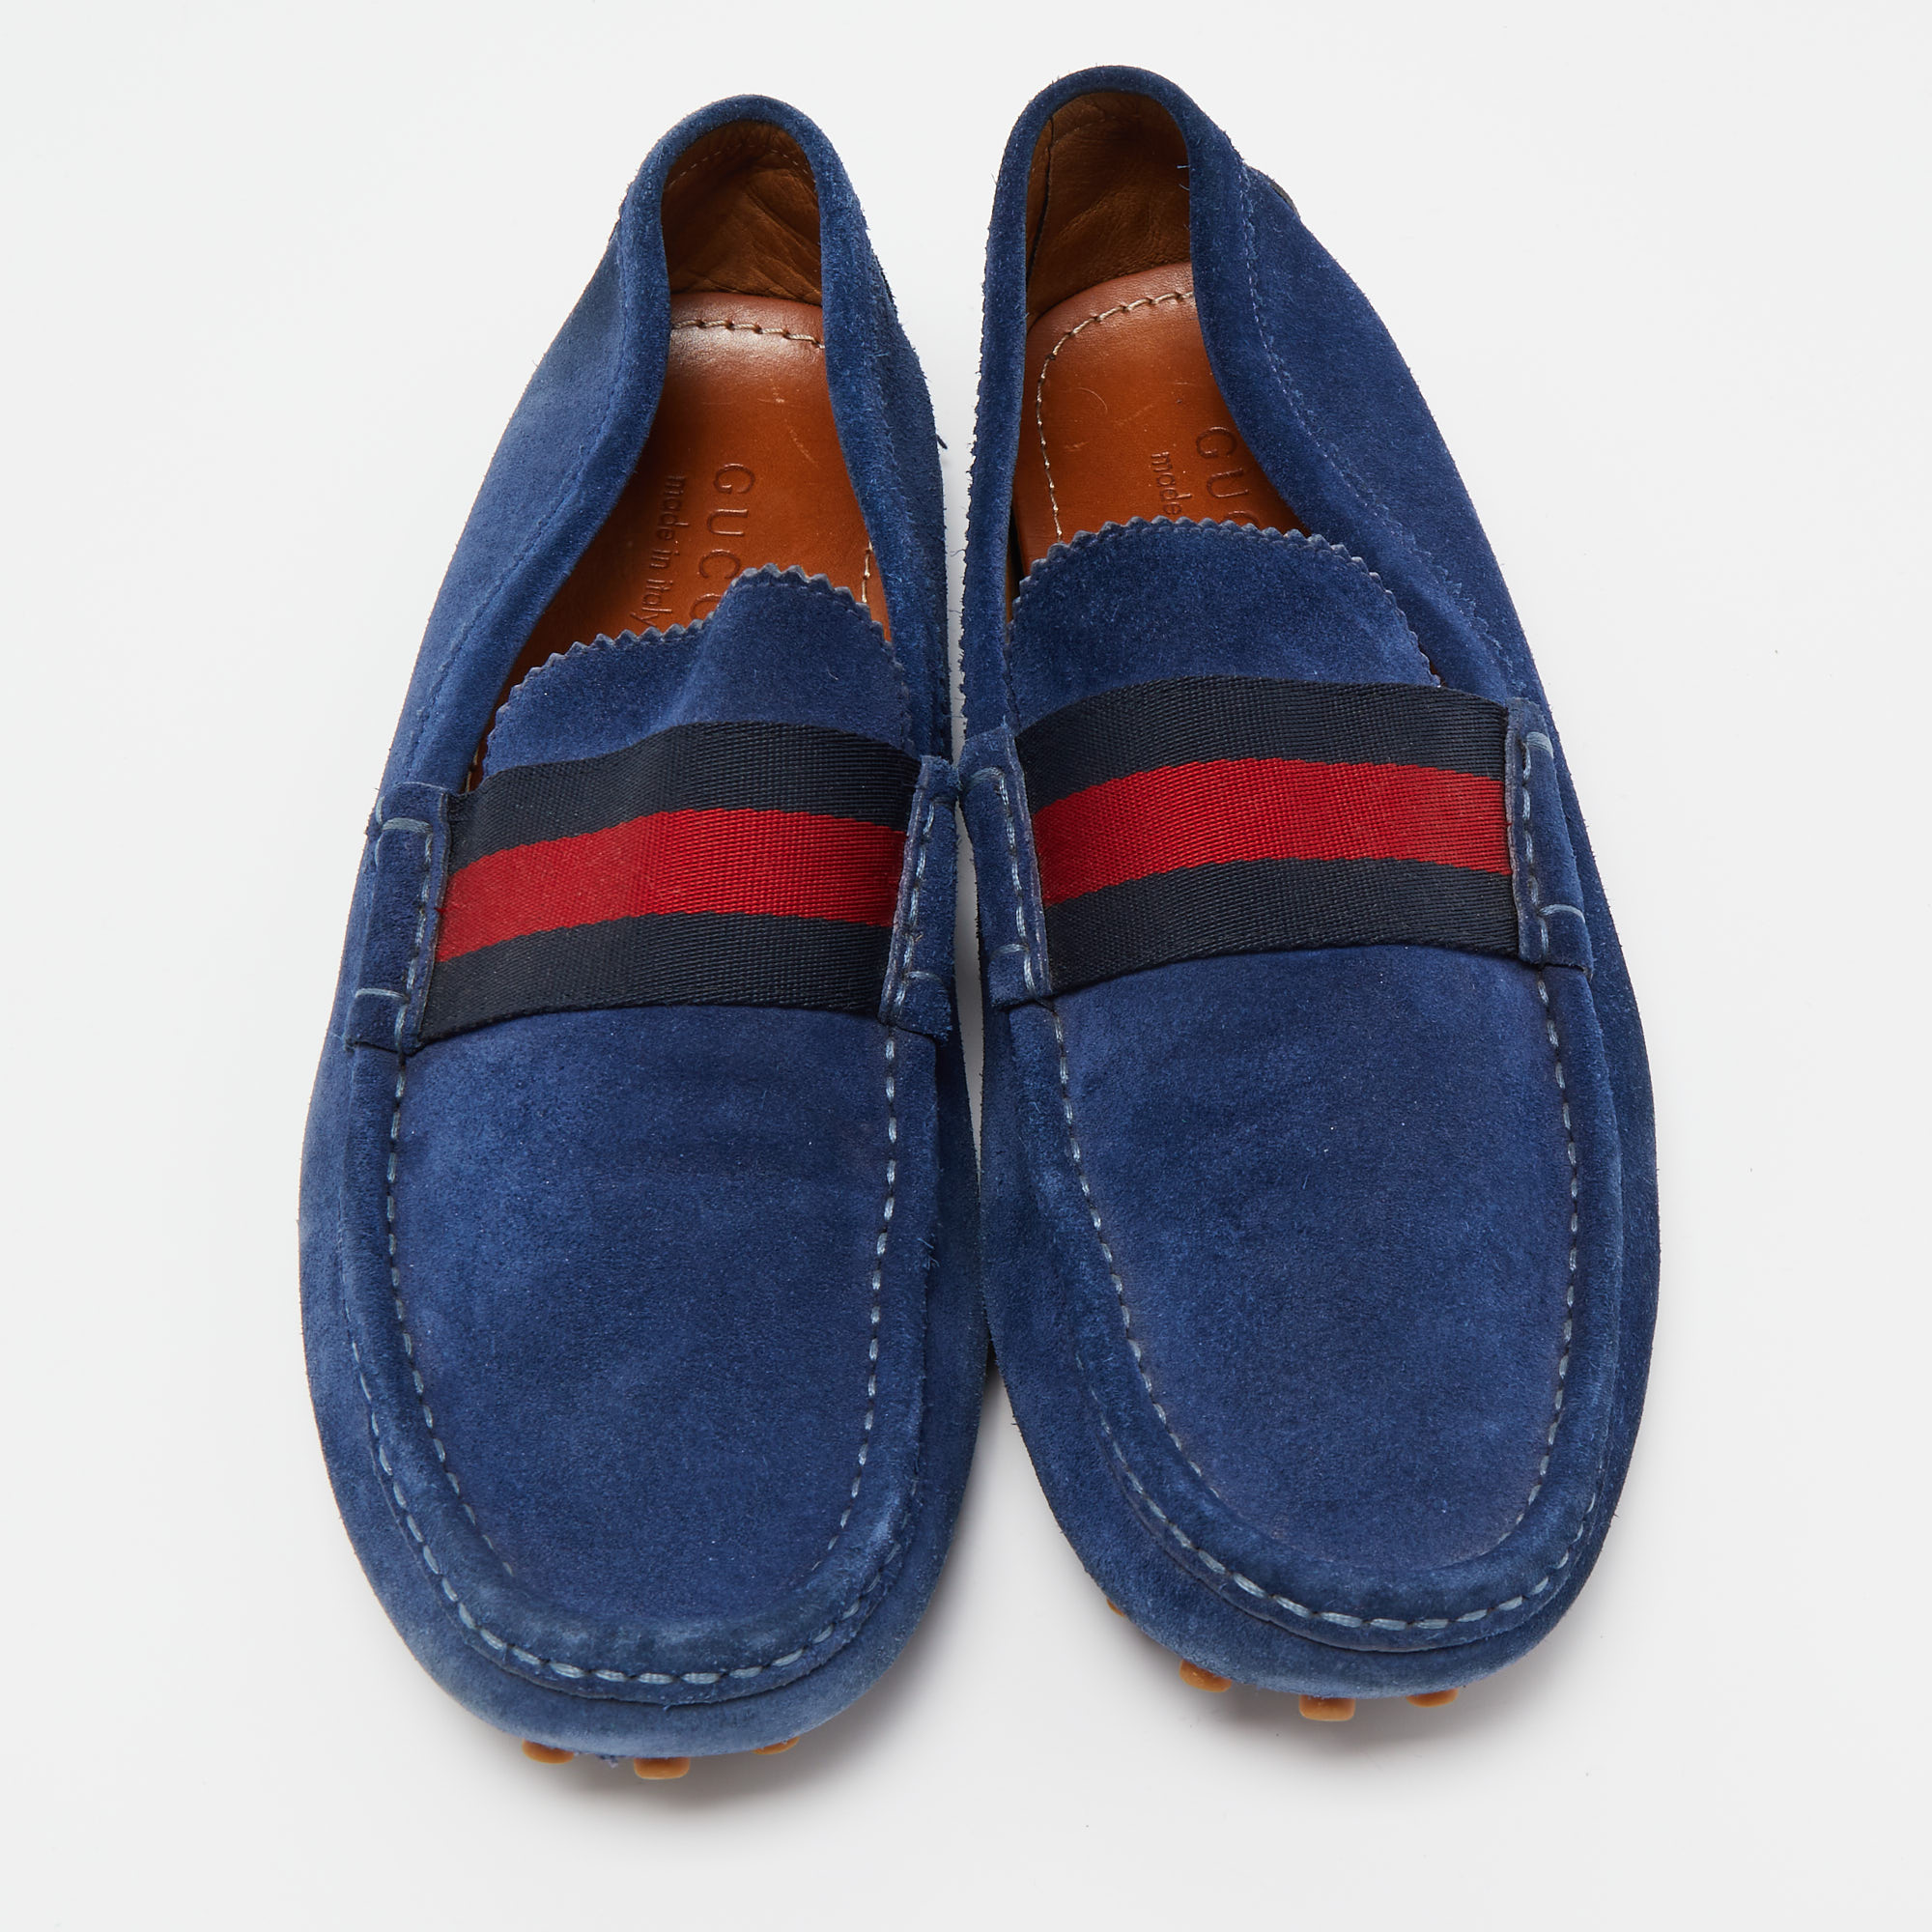 Gucci Blue Suede Web Slip On Loafers Size 42